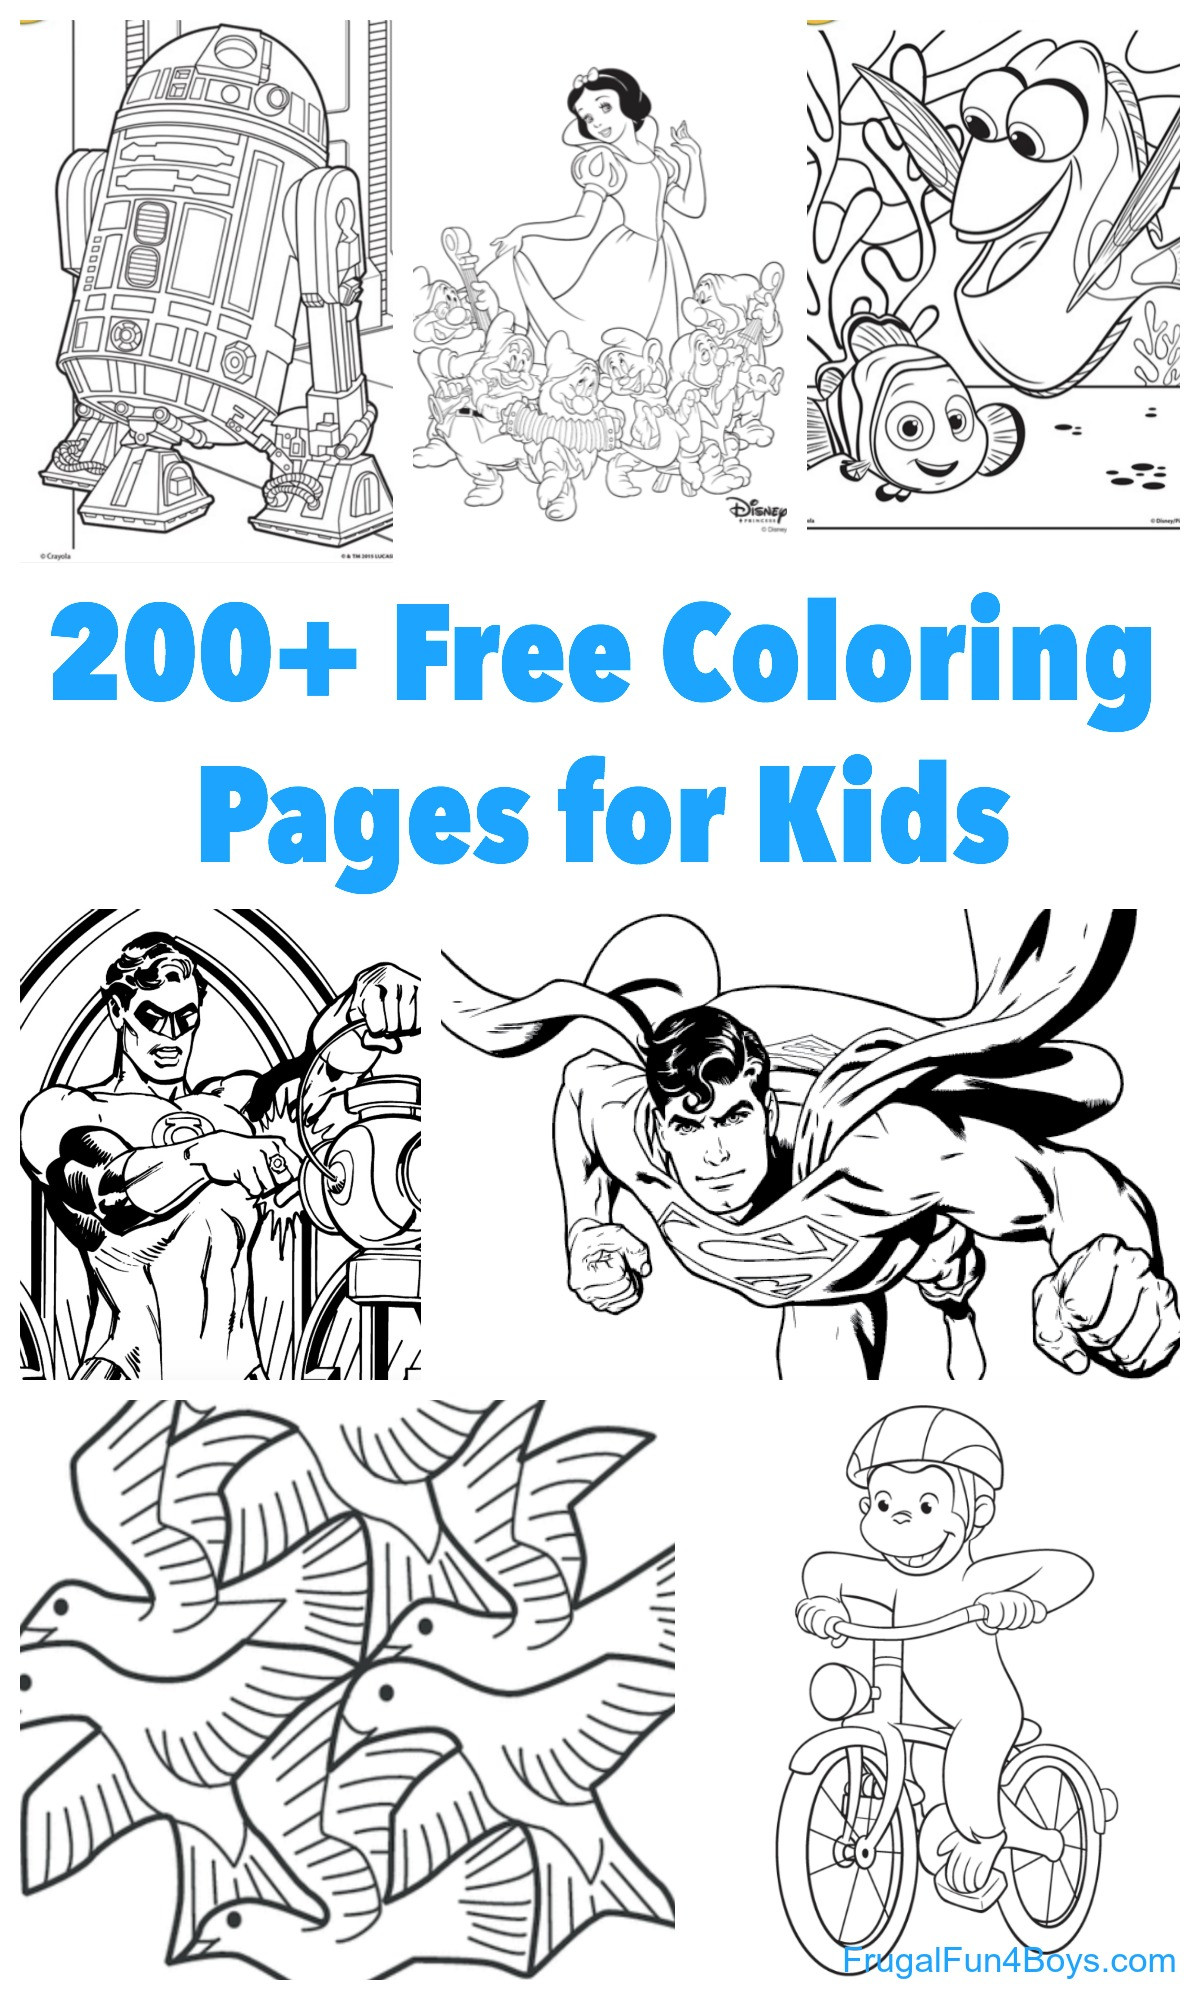 Coloring Pages For Girls And Boys
 200 Printable Coloring Pages for Kids Frugal Fun For